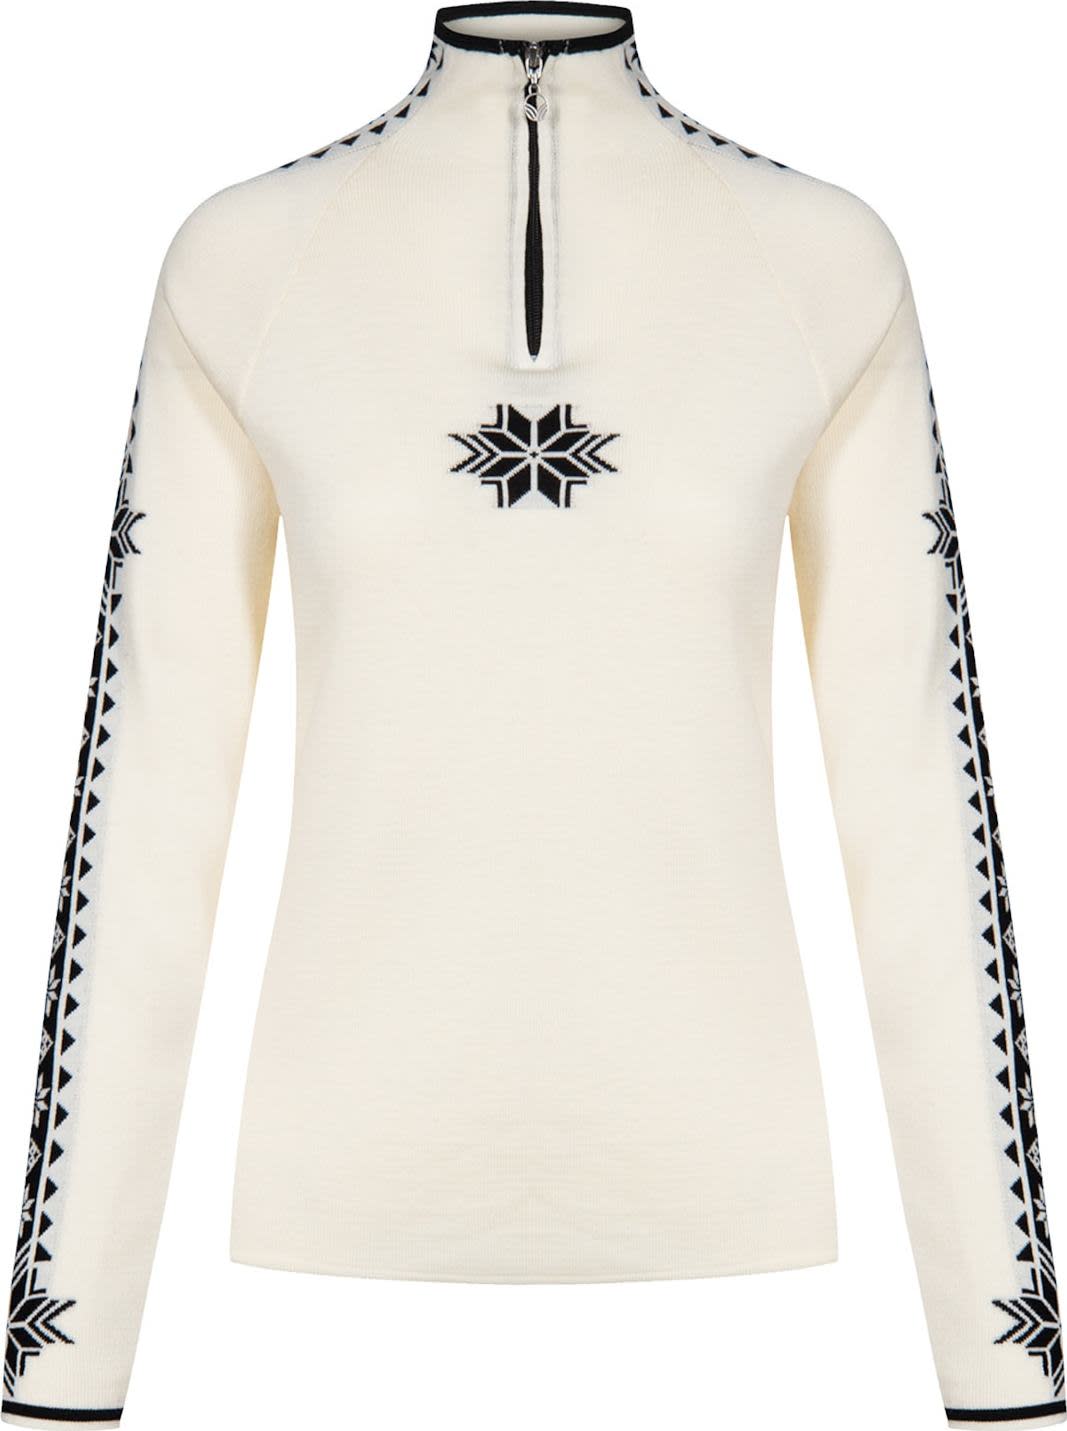 Dale of Norway Women’s Geilo Sweater Offwhite Black